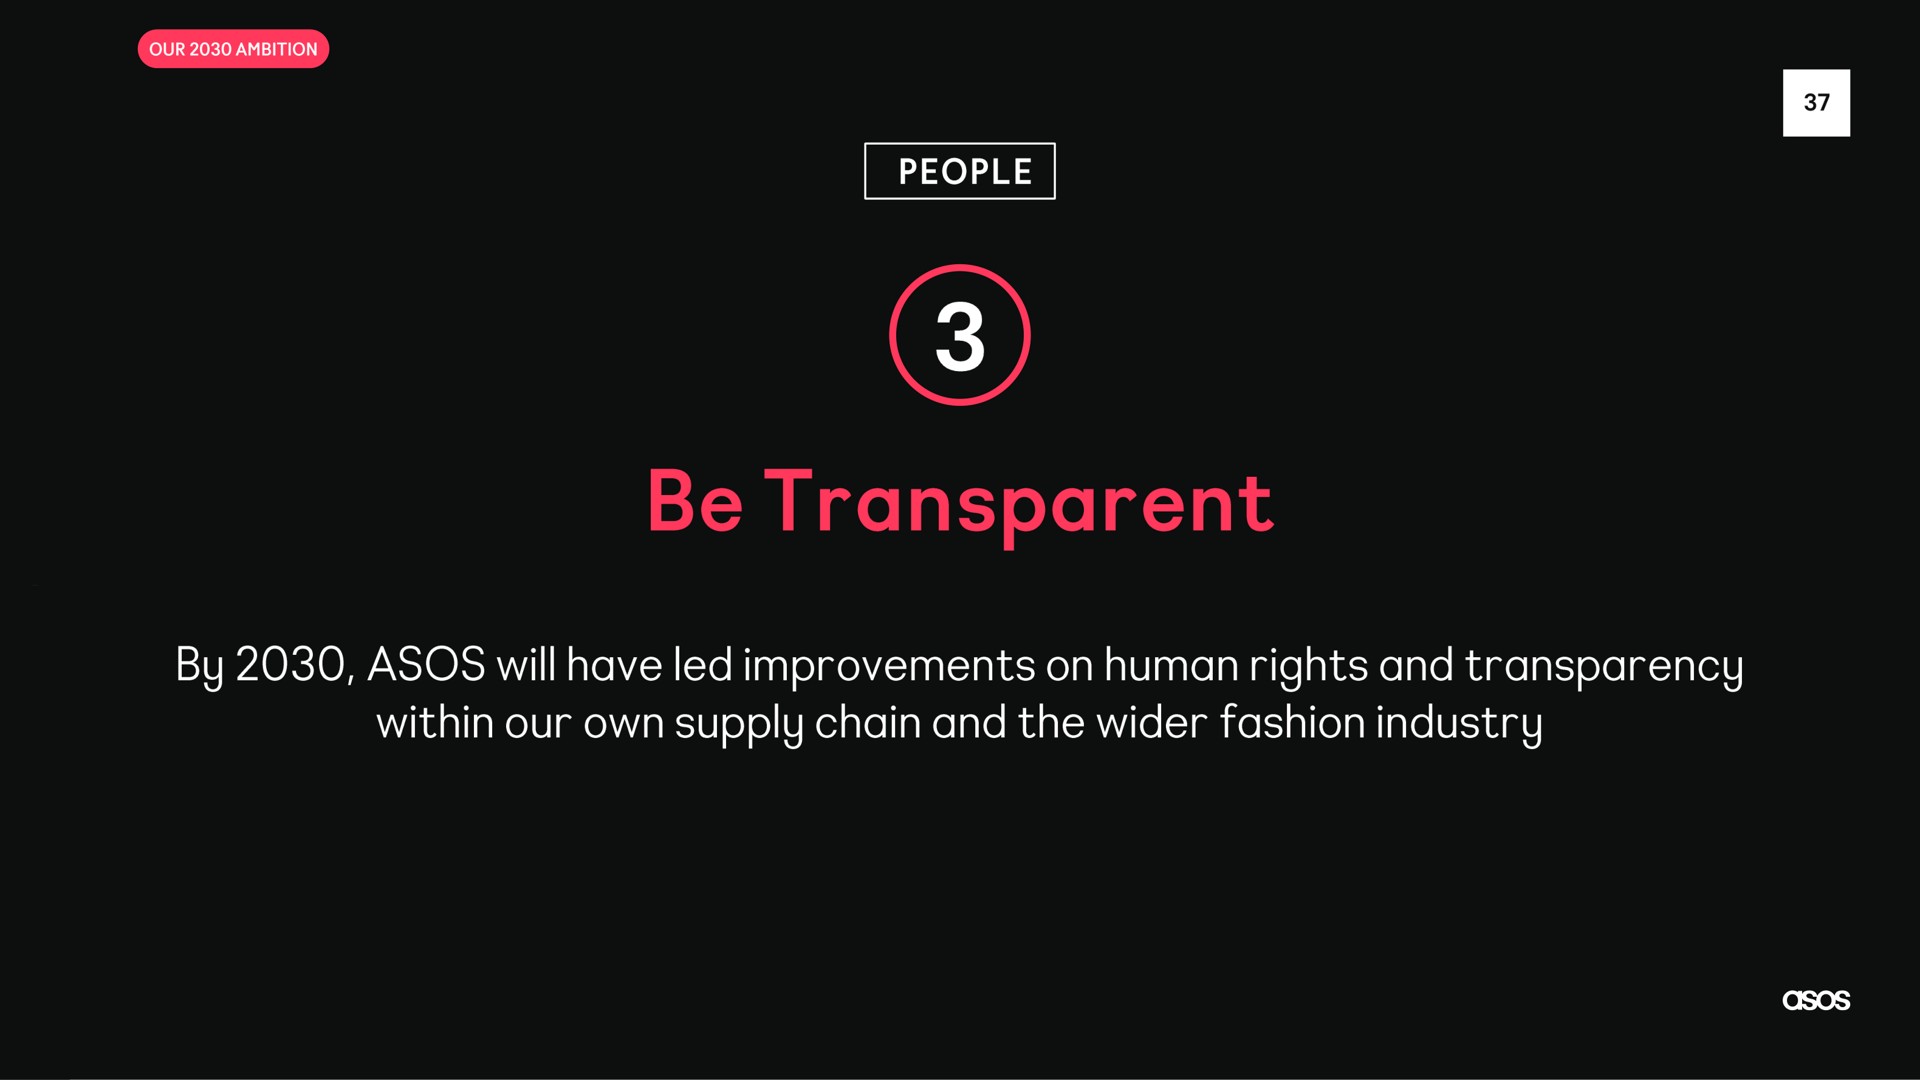 be transparent by will have led improvements on human rights and transparency within our own supply chain and the fashion industry | Asos